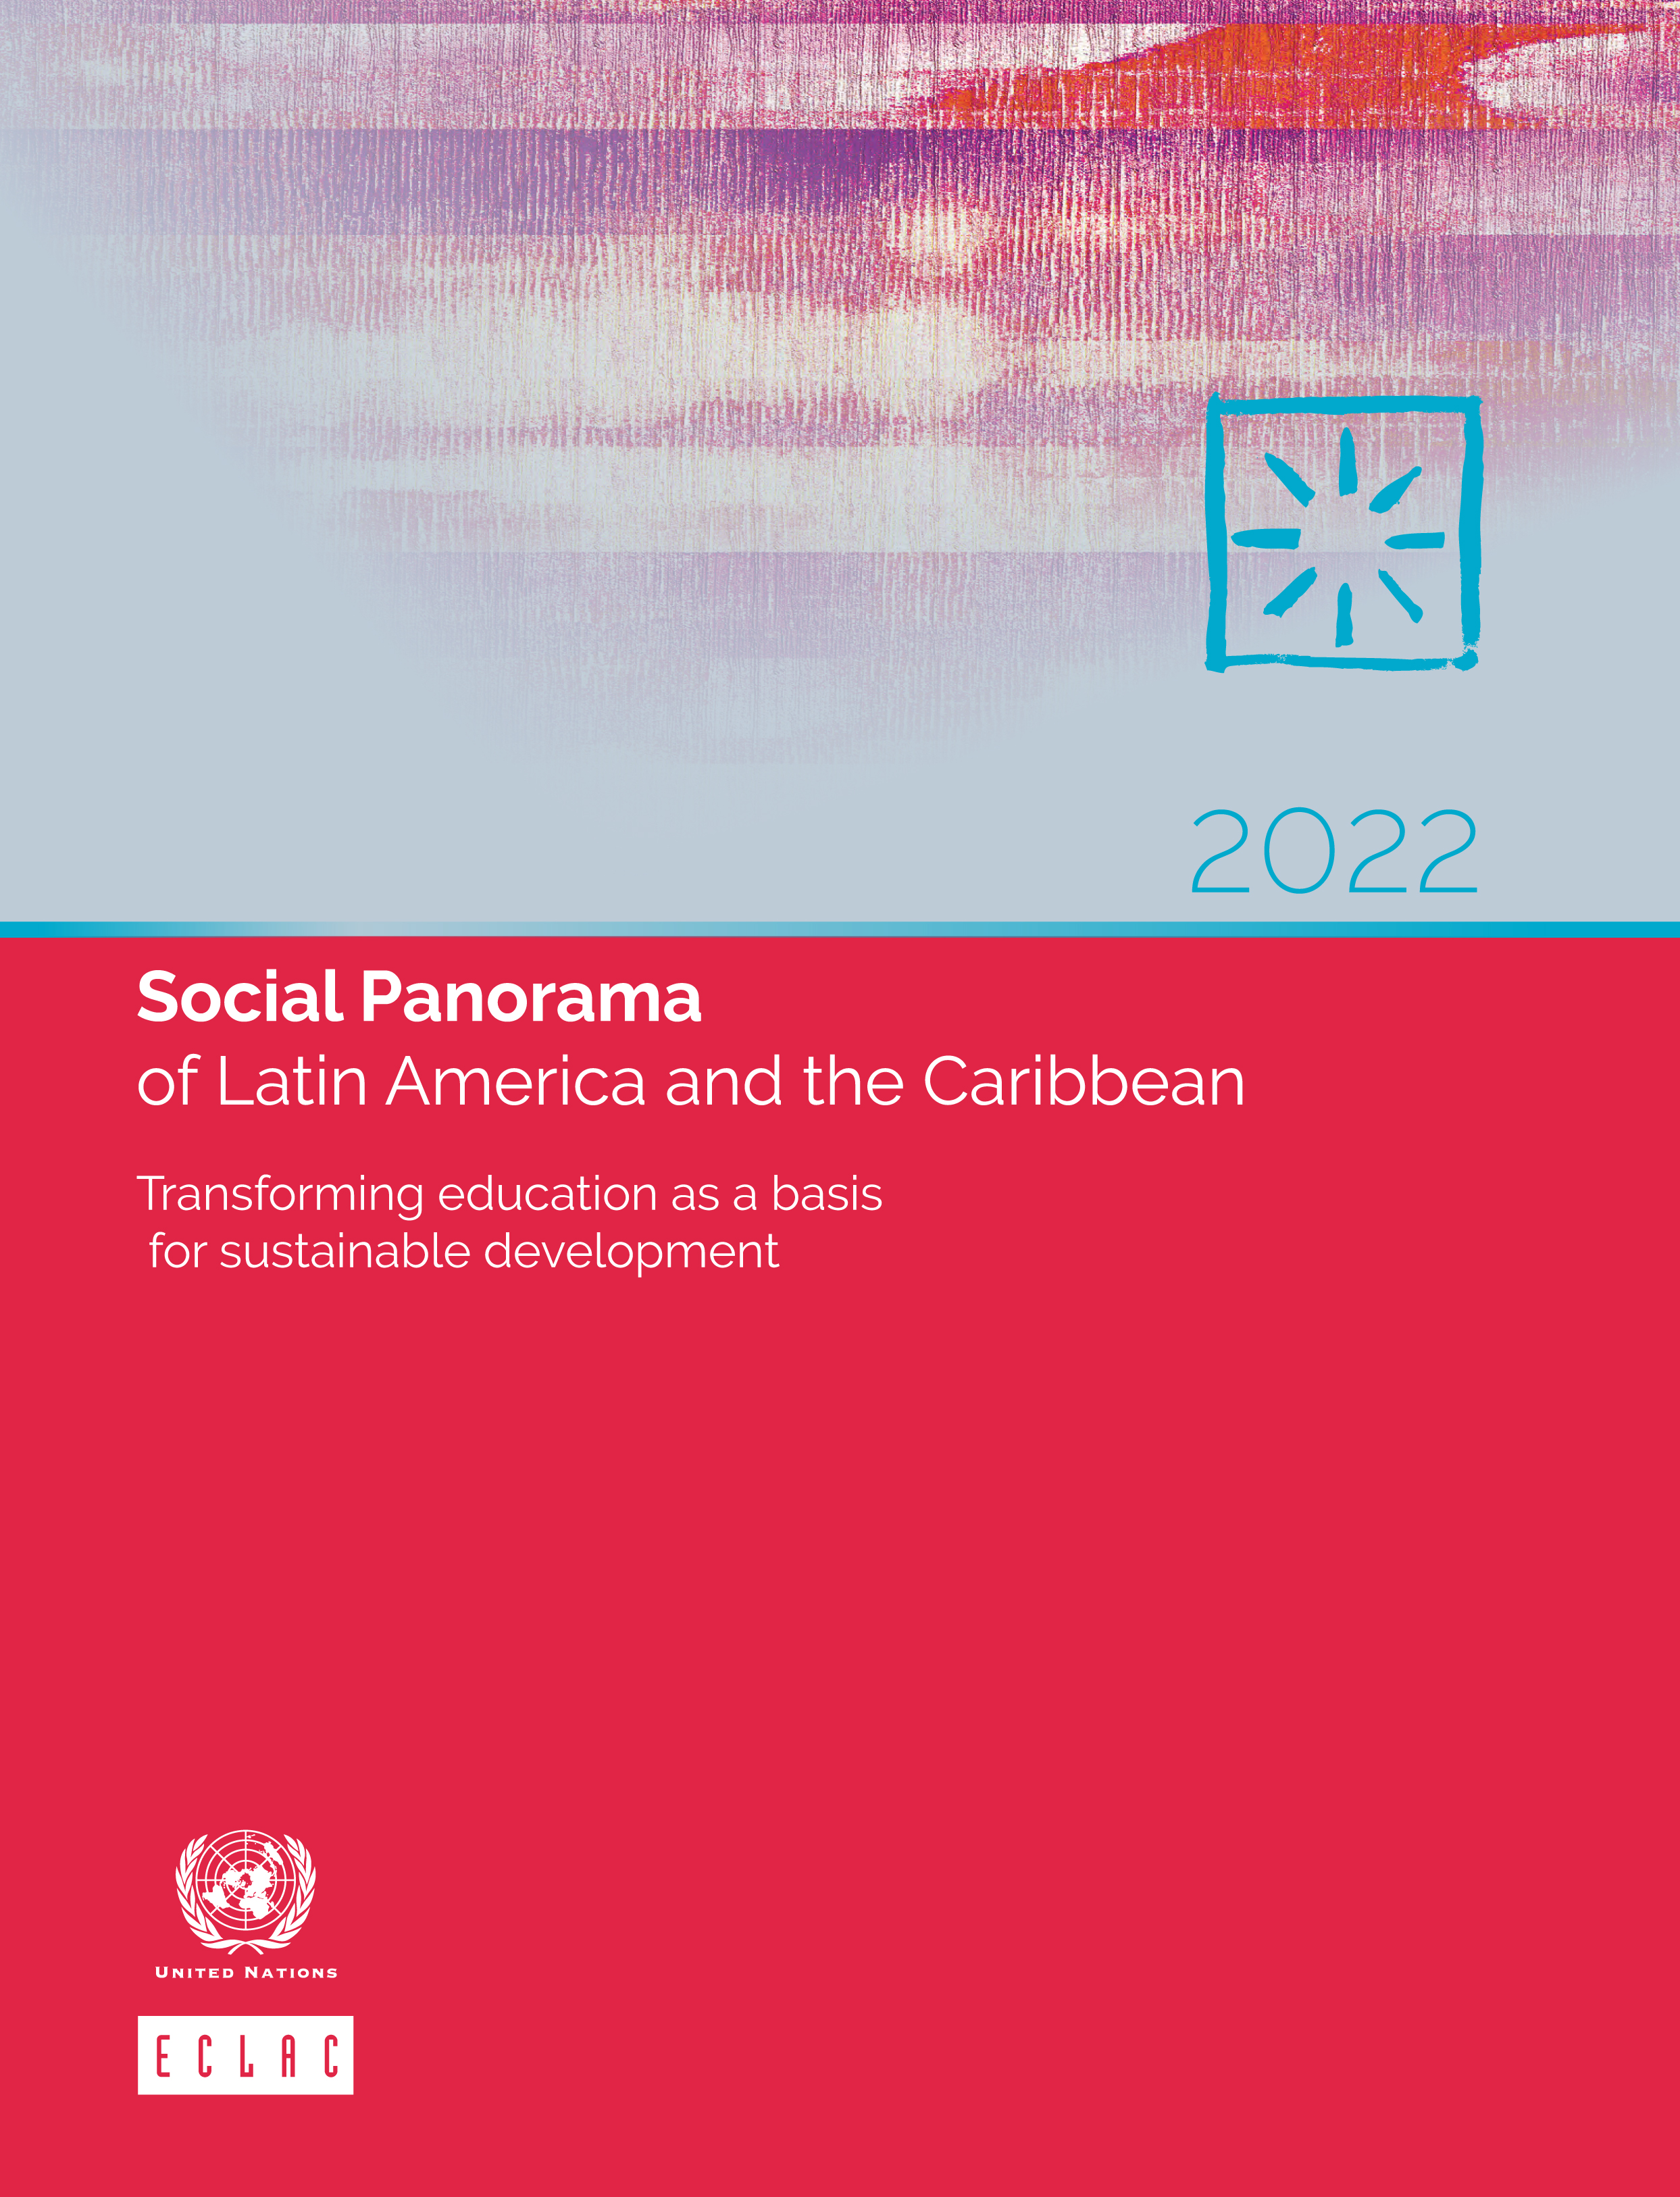 image of Social Panorama of Latin America and the Caribbean 2022